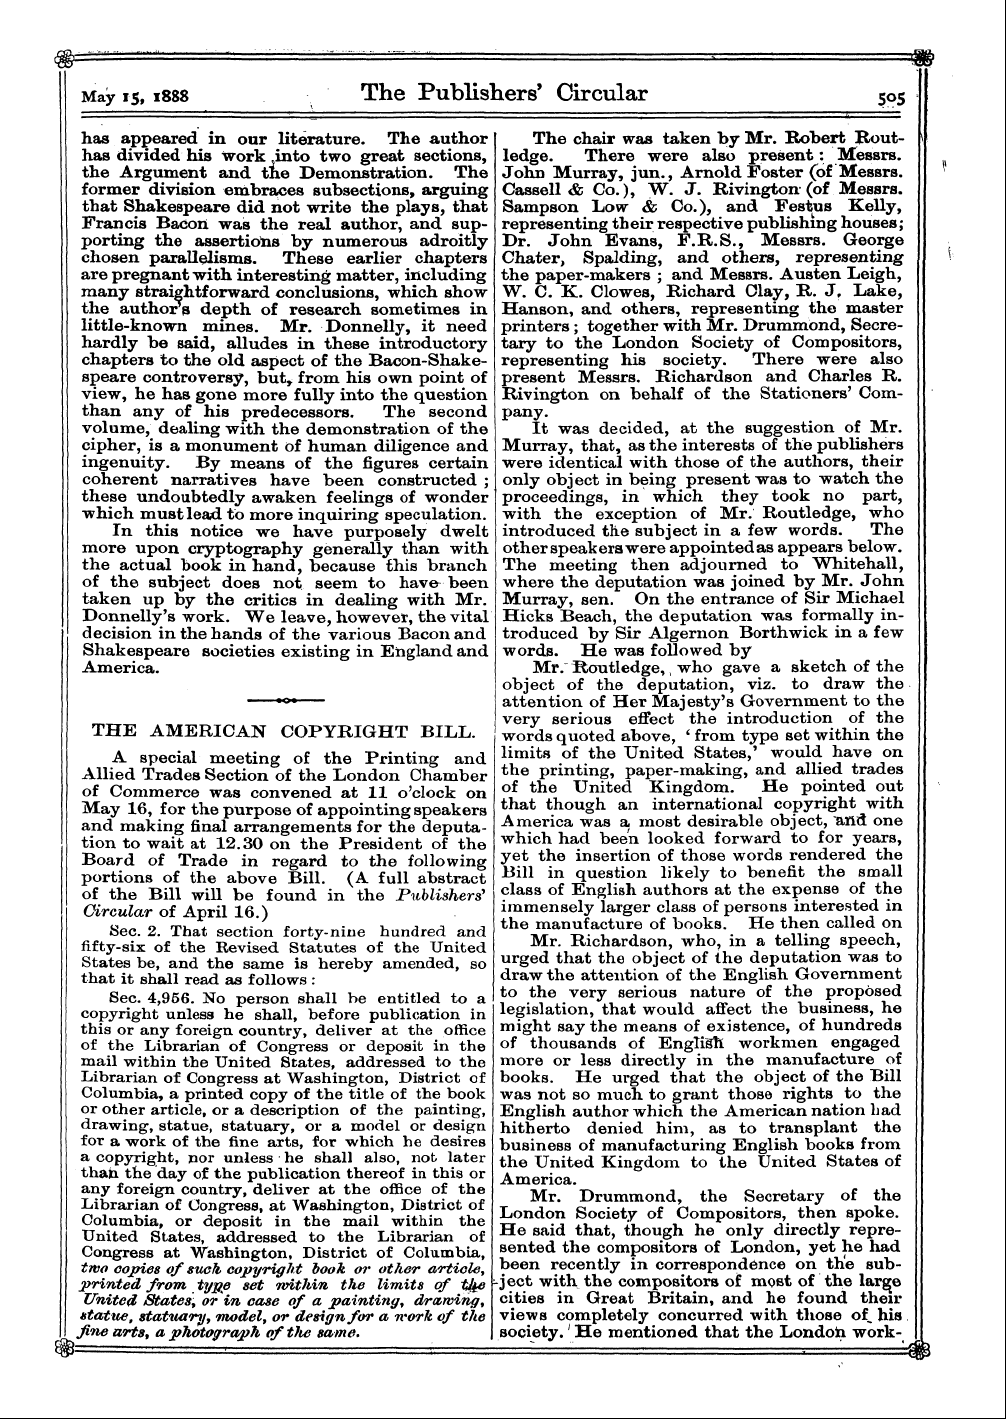 Publishers’ Circular (1880-1890): jS F Y, 1st edition - The American Copyright Bill.